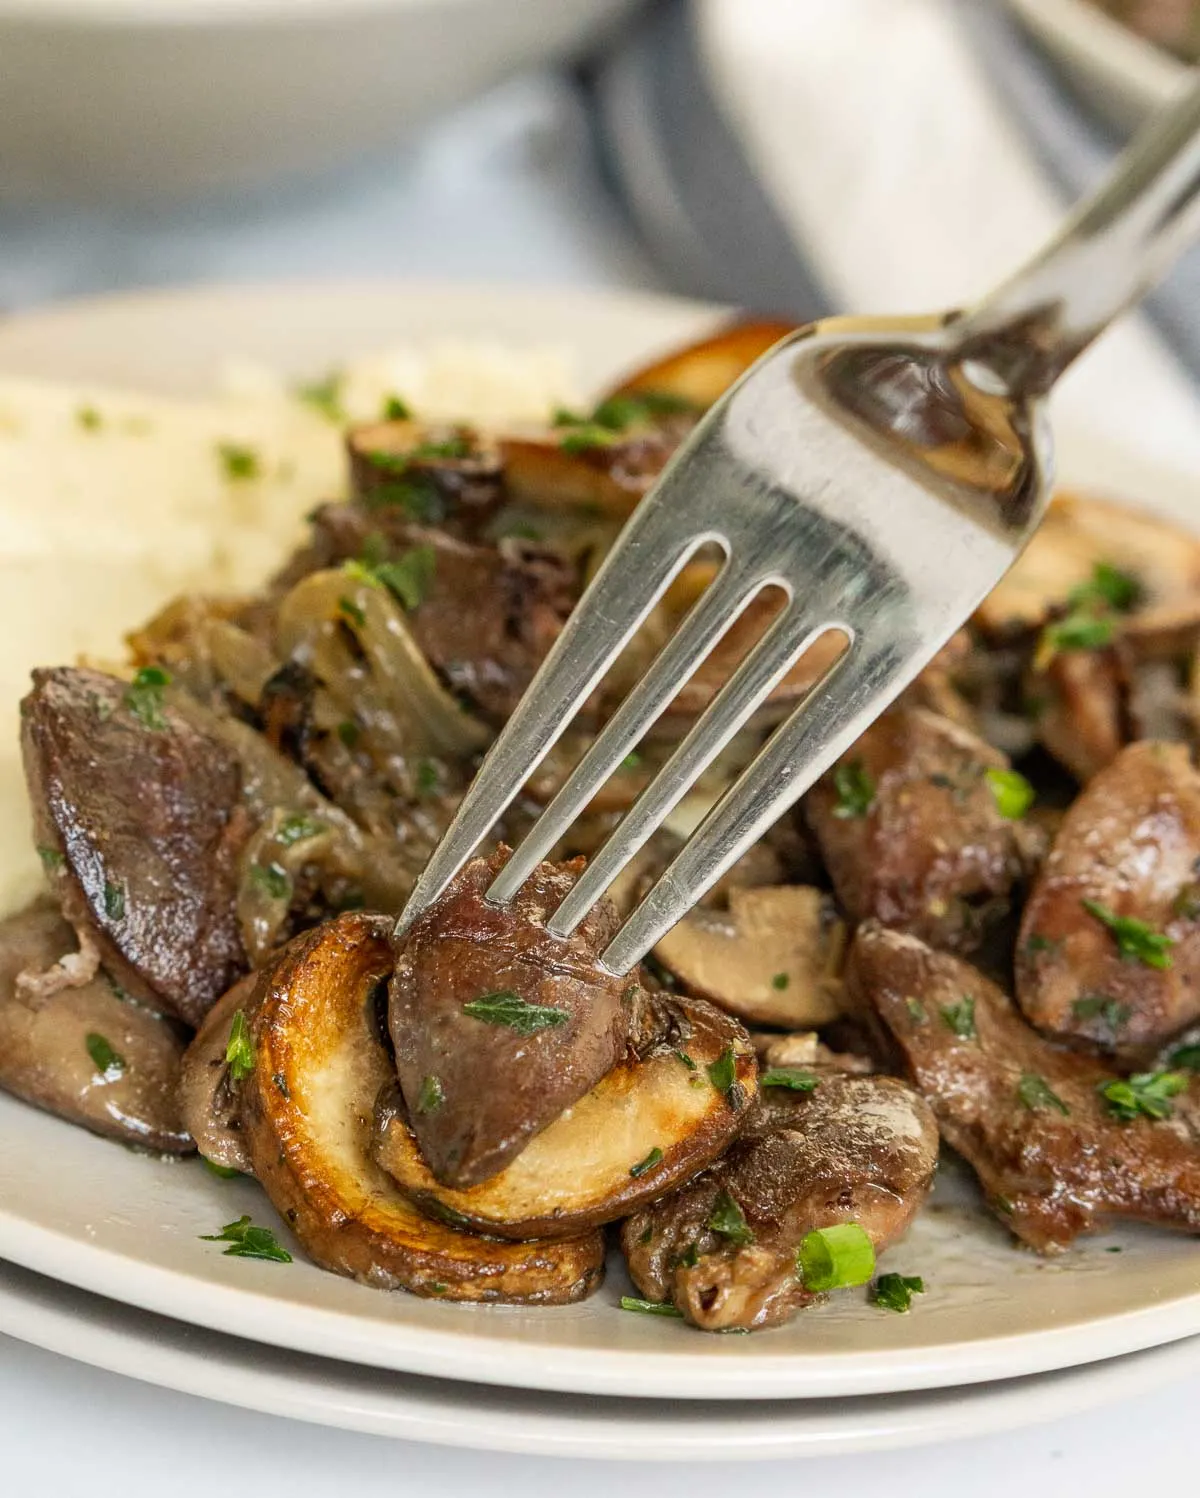 Sauteed chicken hearts with mushrooms on a plate with a fork.